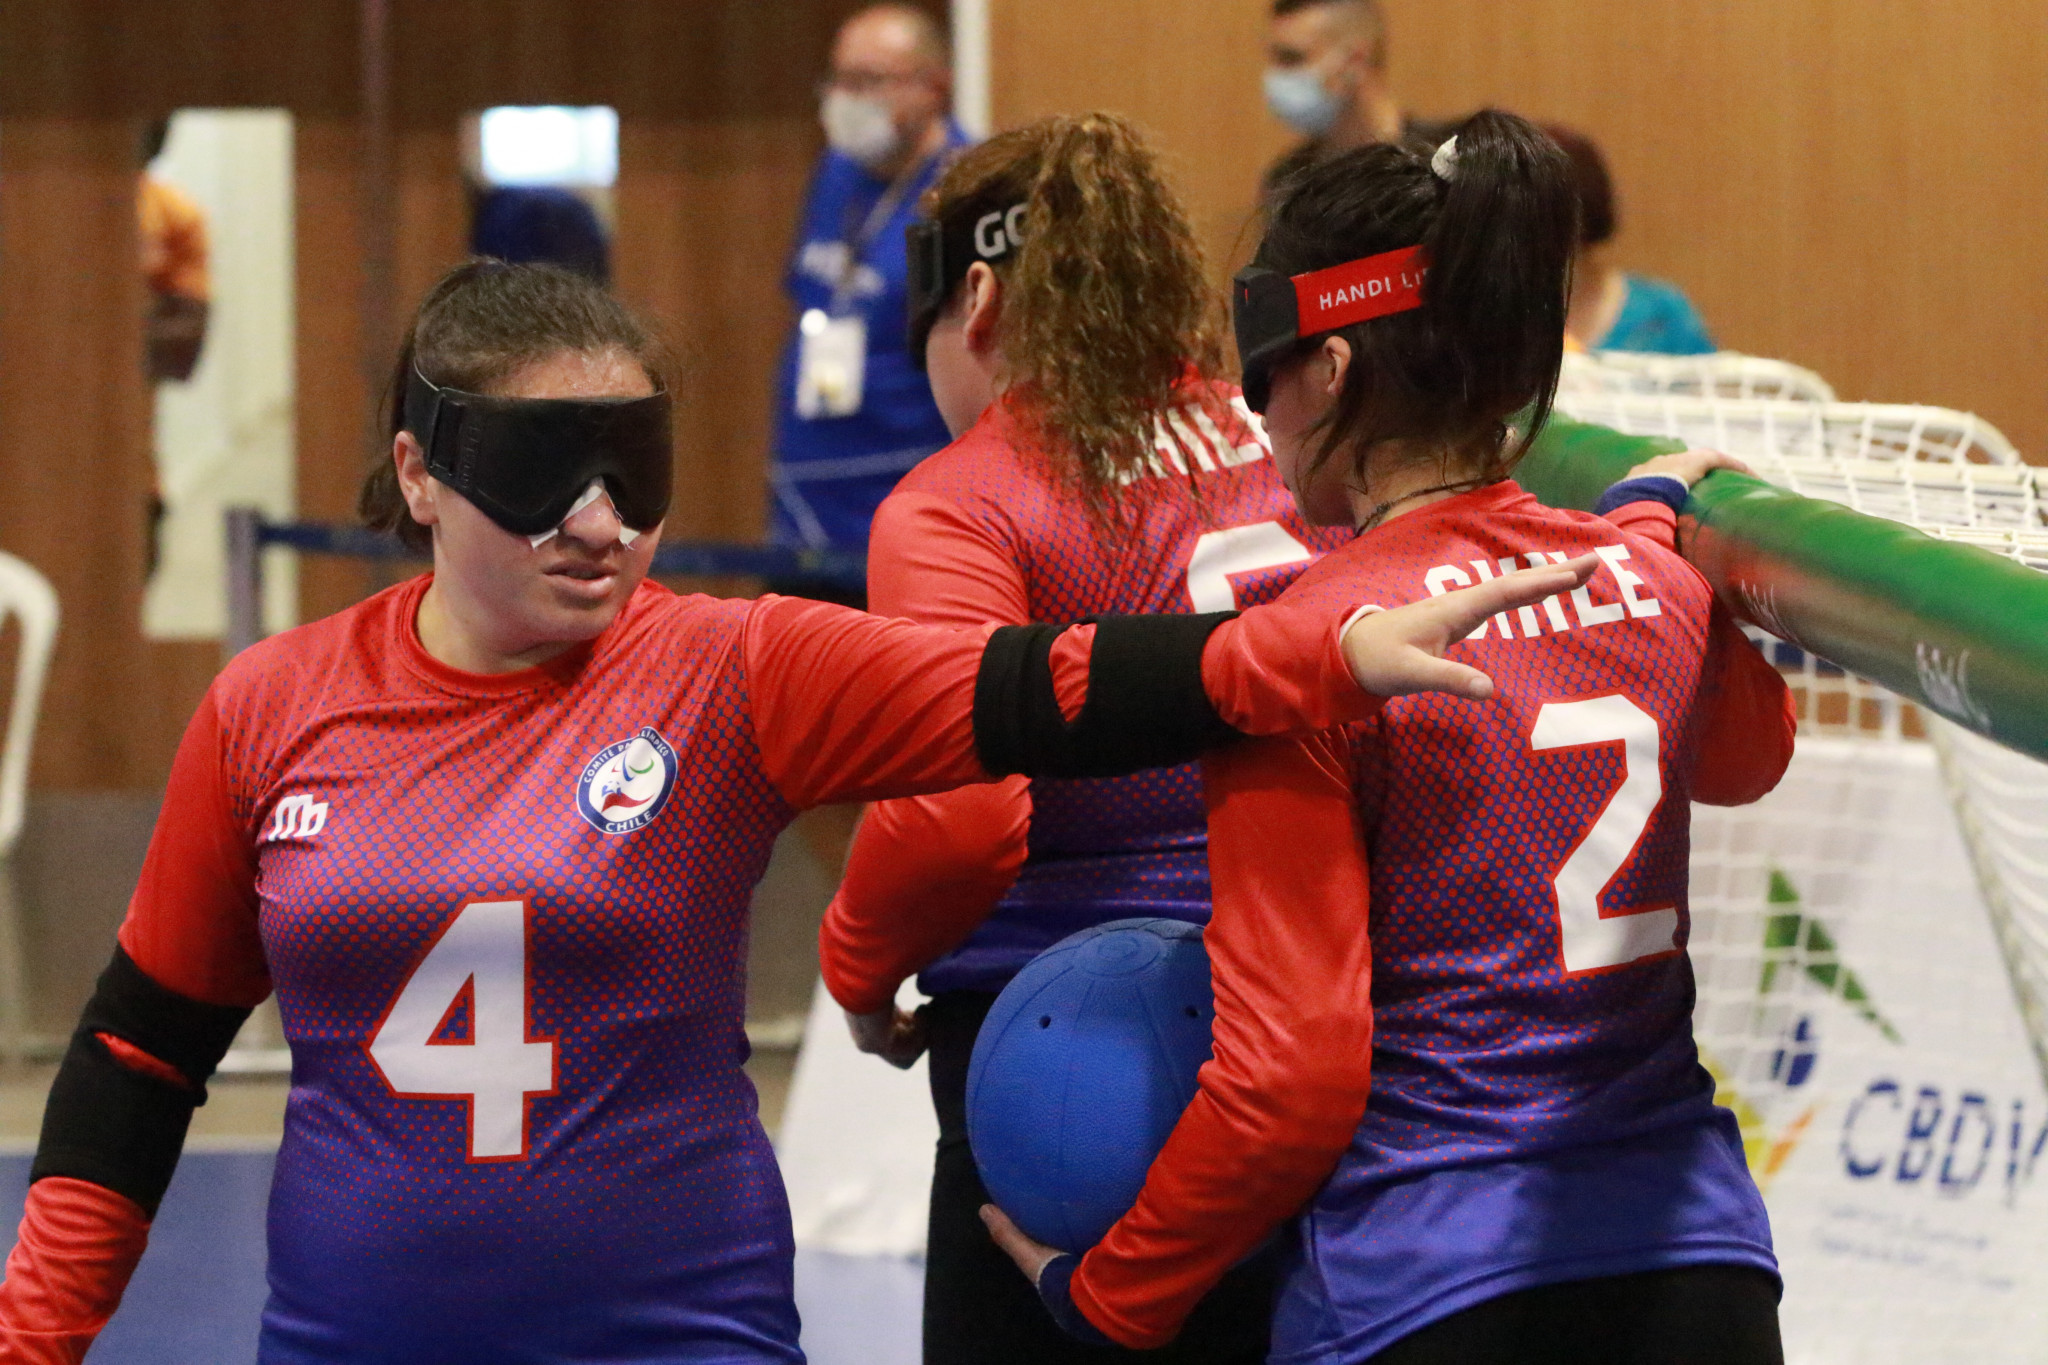 Debutants Chile won their winner-takes-all clash against Nicaragua in Pool C of the women's competition at the IBSA Goalball Americas Championships ©Renan Cacioli/CBDV